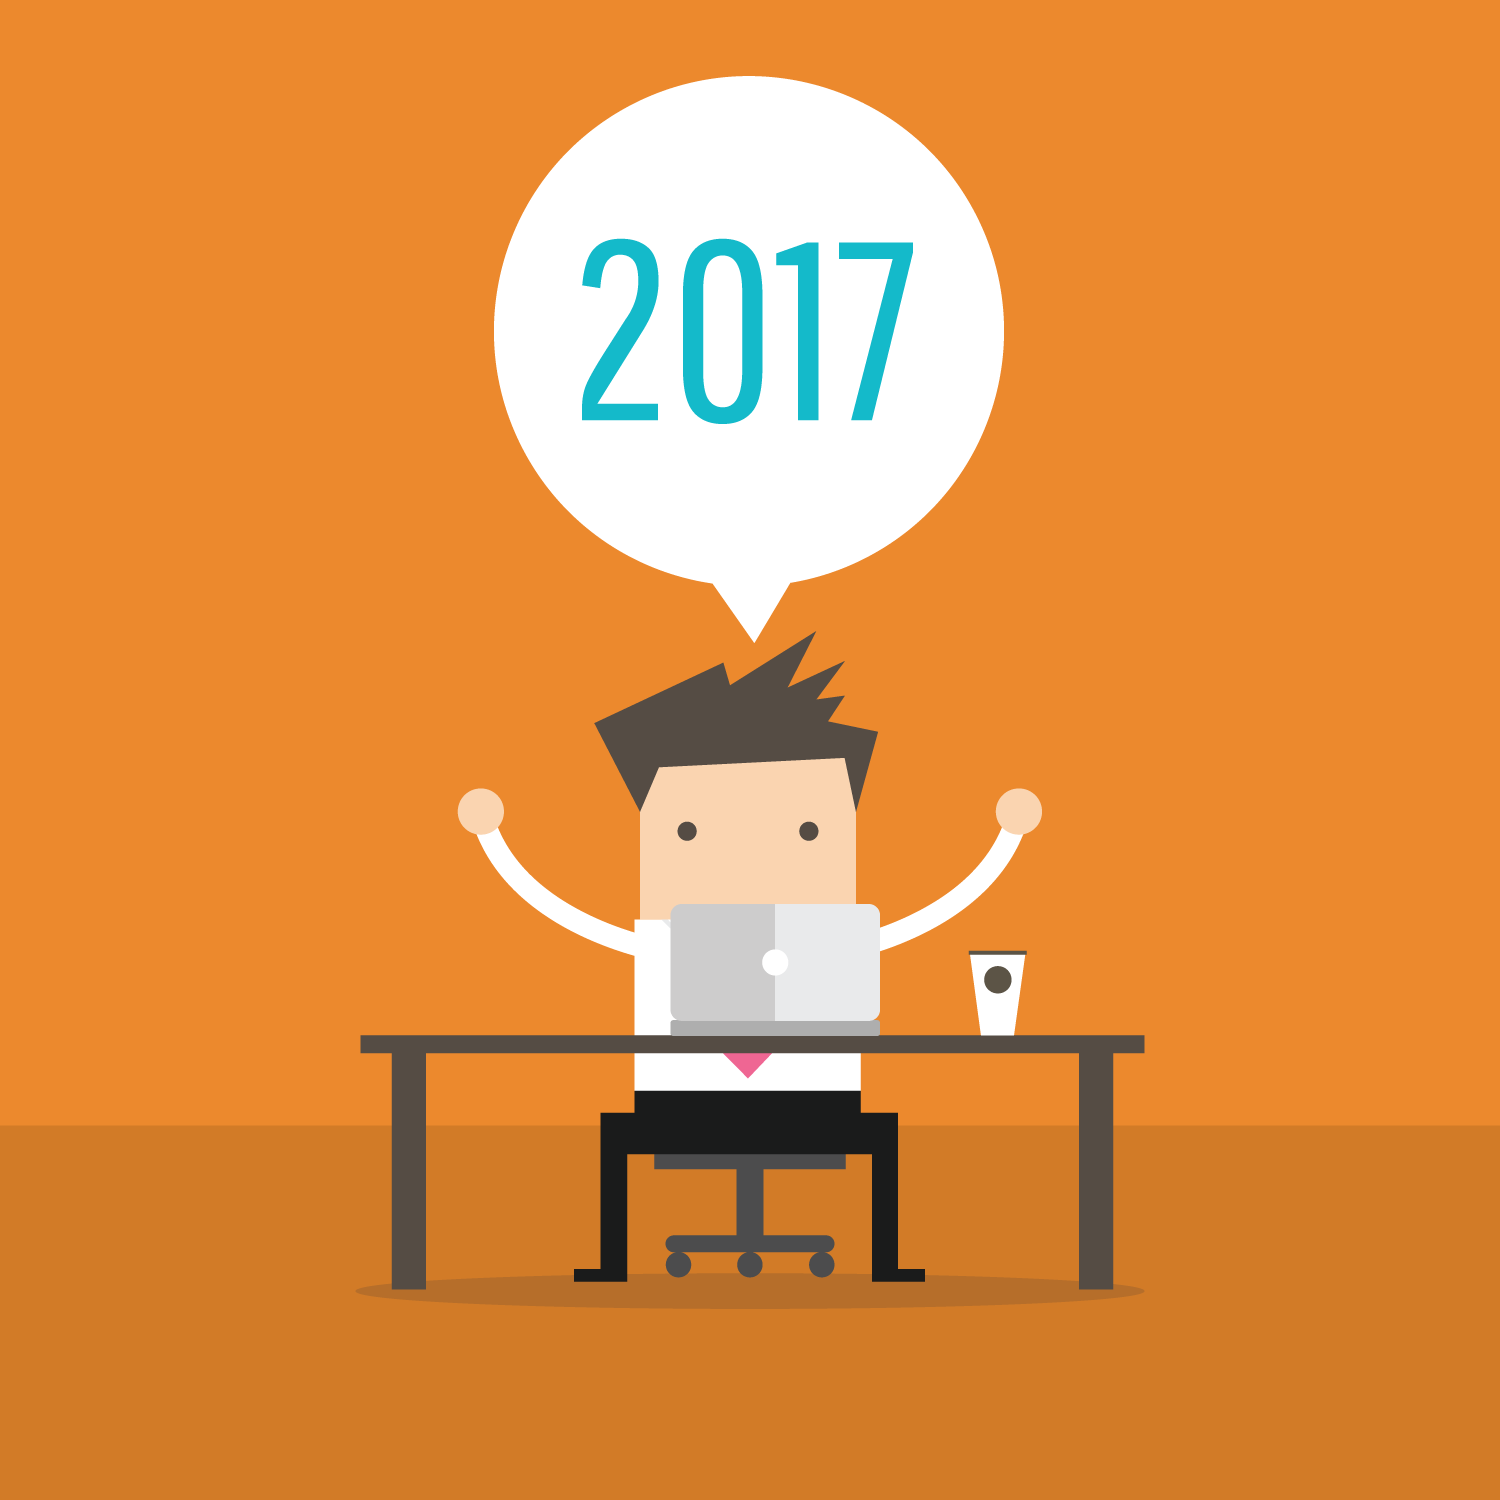 7 Predictions for HR in 2017